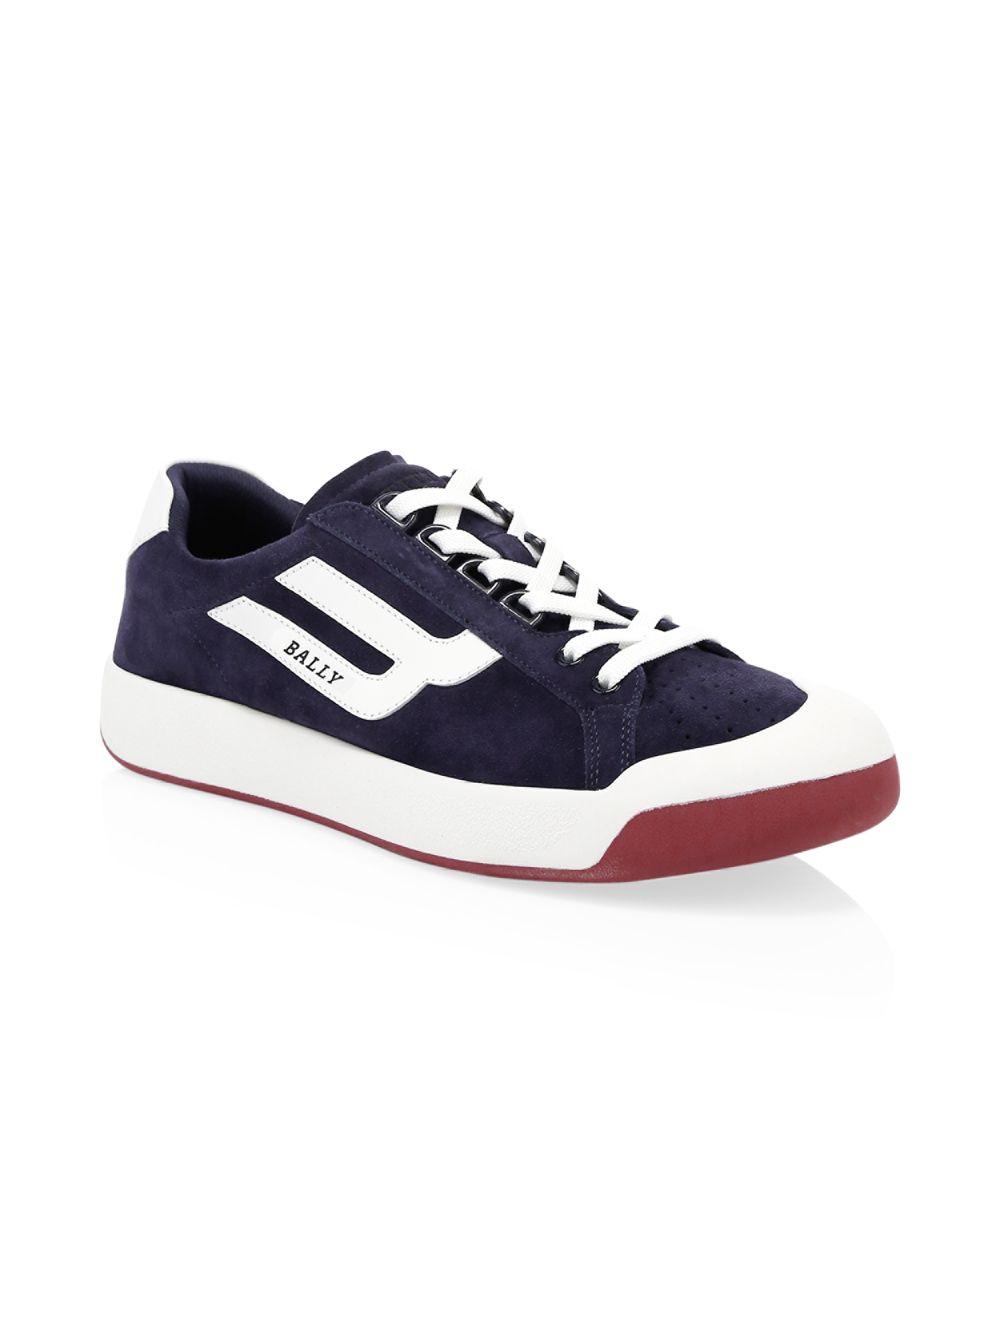 Bally Leather The New Competition Sneakers in Blue for Men - Lyst